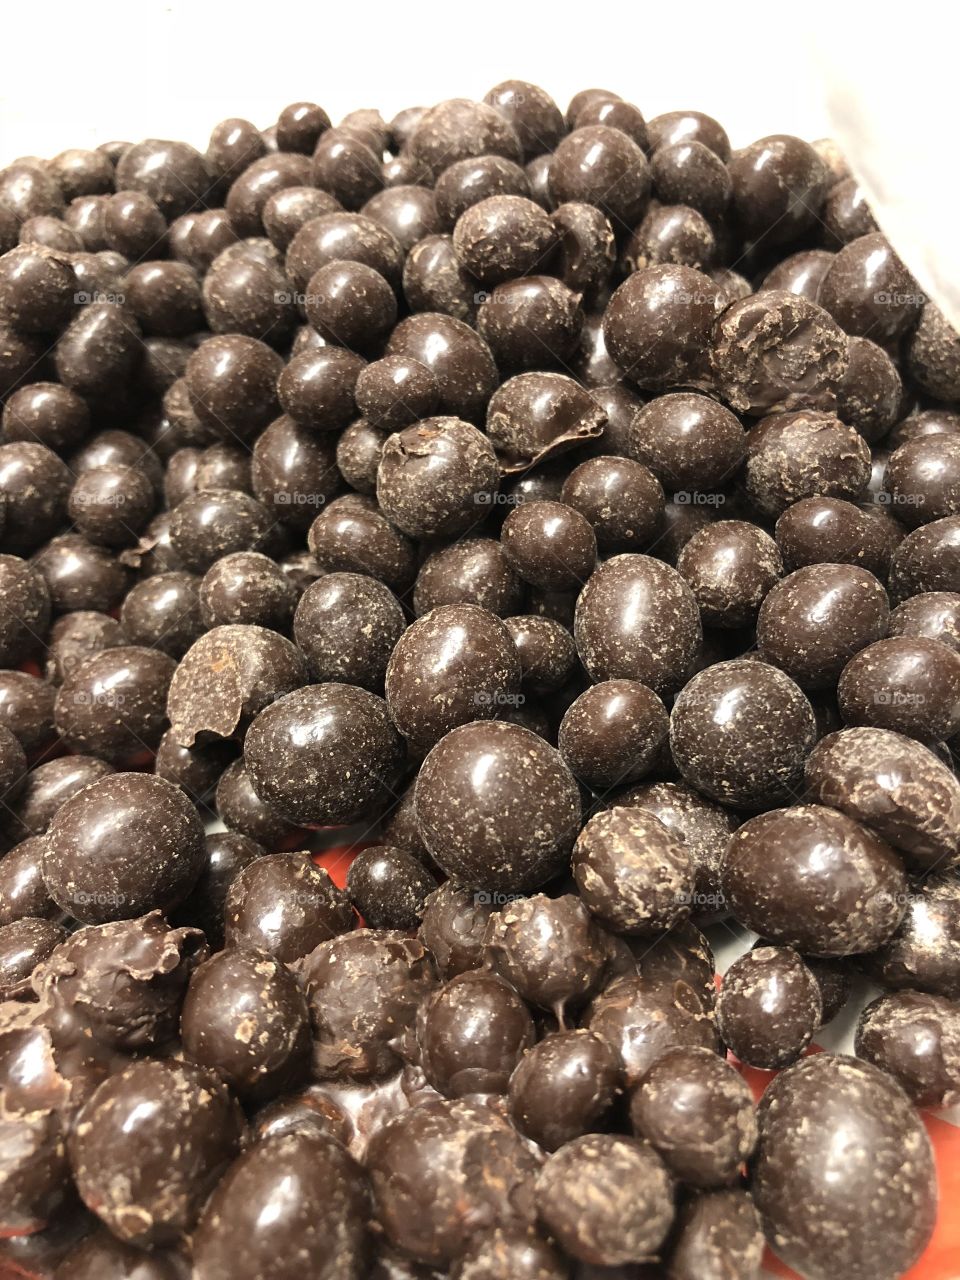 Chocolate covered coffee beans 